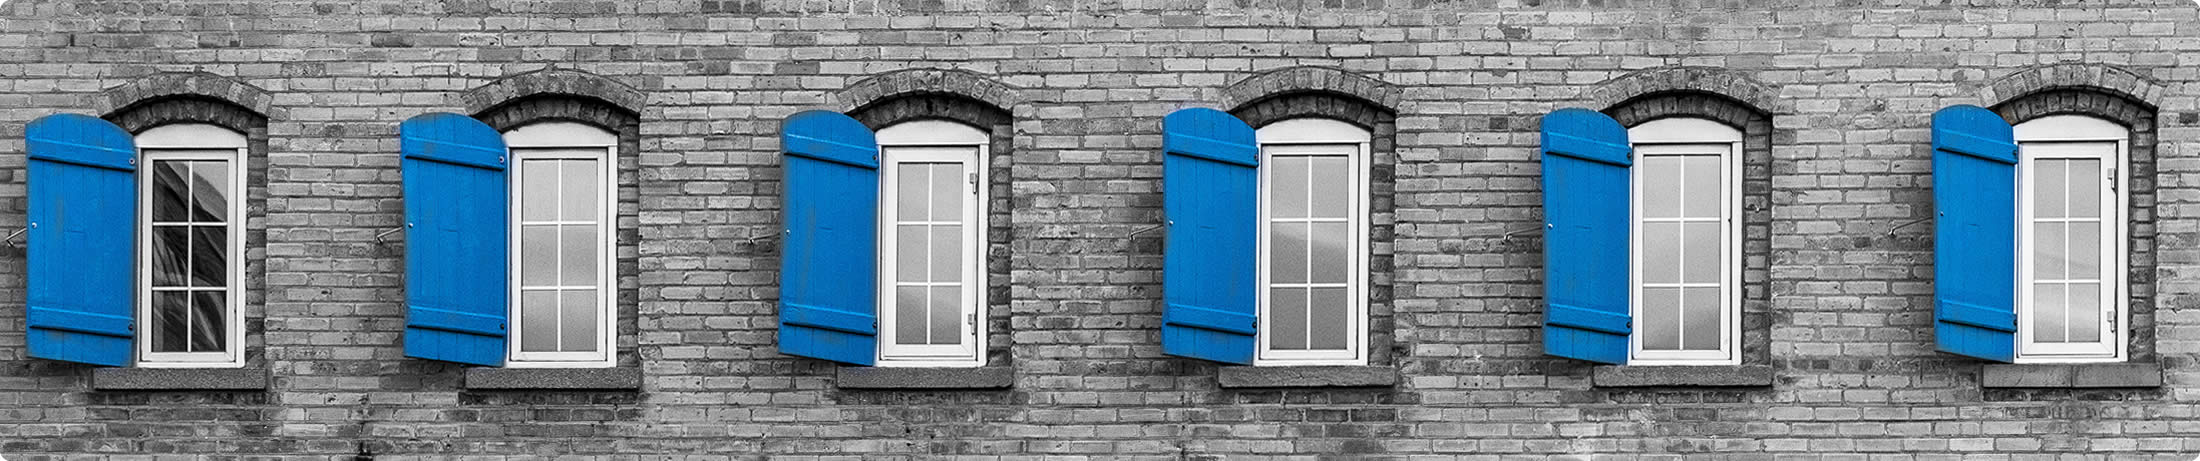 windows-with-blue-shutters